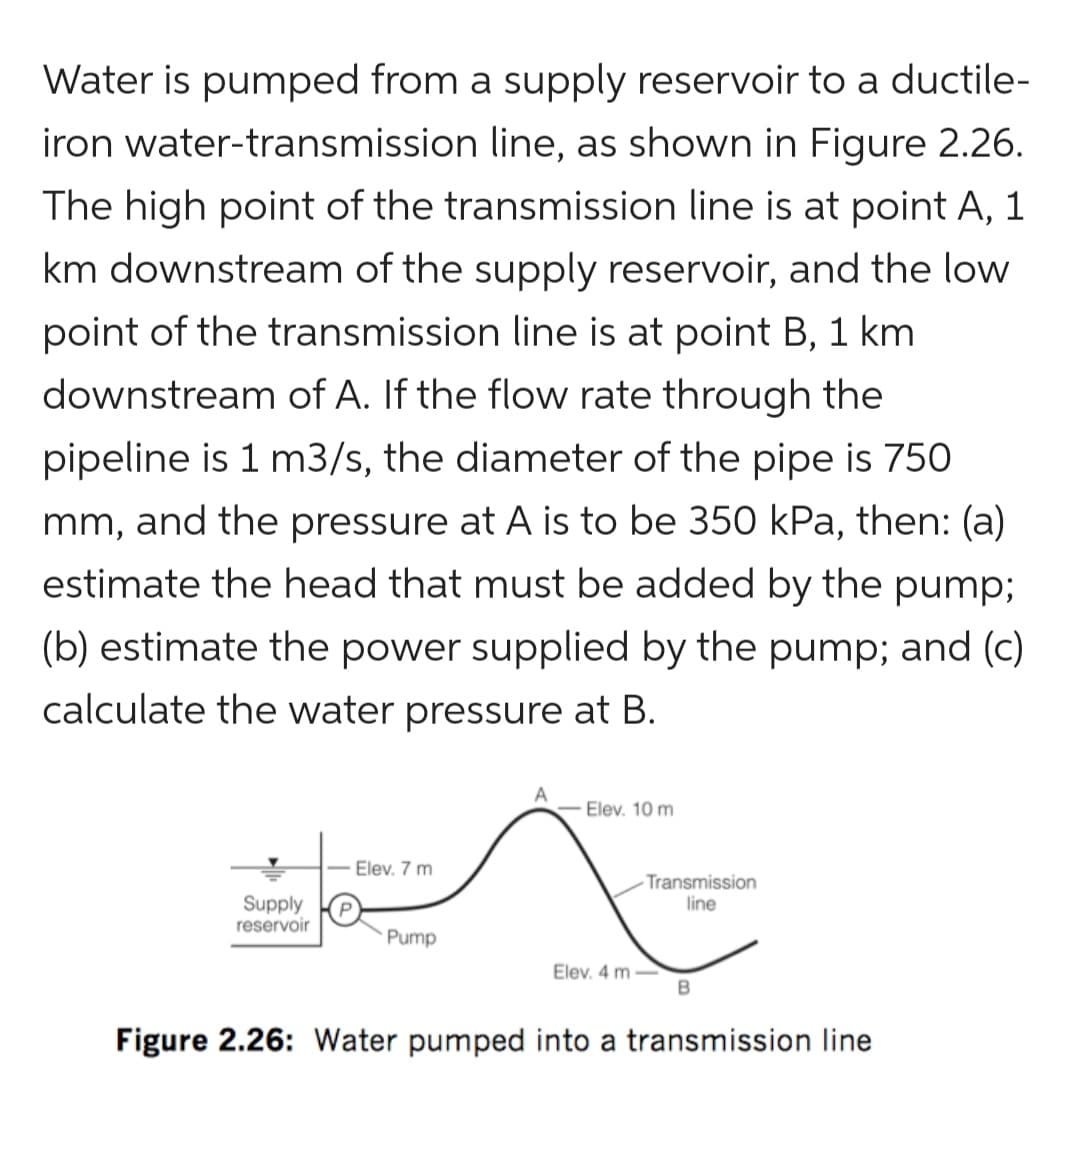 Water is pumped from a supply reservoir to a ductile-
iron water-transmission line, as shown in Figure 2.26.
The high point of the transmission line is at point A, 1
km downstream of the supply reservoir, and the low
point of the transmission line is at point B, 1 km
downstream of A. If the flow rate through the
pipeline is 1 m3/s, the diameter of the pipe is 750
mm, and the pressure at A is to be 350 kPa, then: (a)
estimate the head that must be added by the pump;
(b) estimate the power supplied by the pump; and (c)
calculate the water pressure at B.
Supply
reservoir
Elev. 7 m
Pump
Elev. 10 m
Transmission
line
Elev. 4 m-
B
Figure 2.26: Water pumped into a transmission line